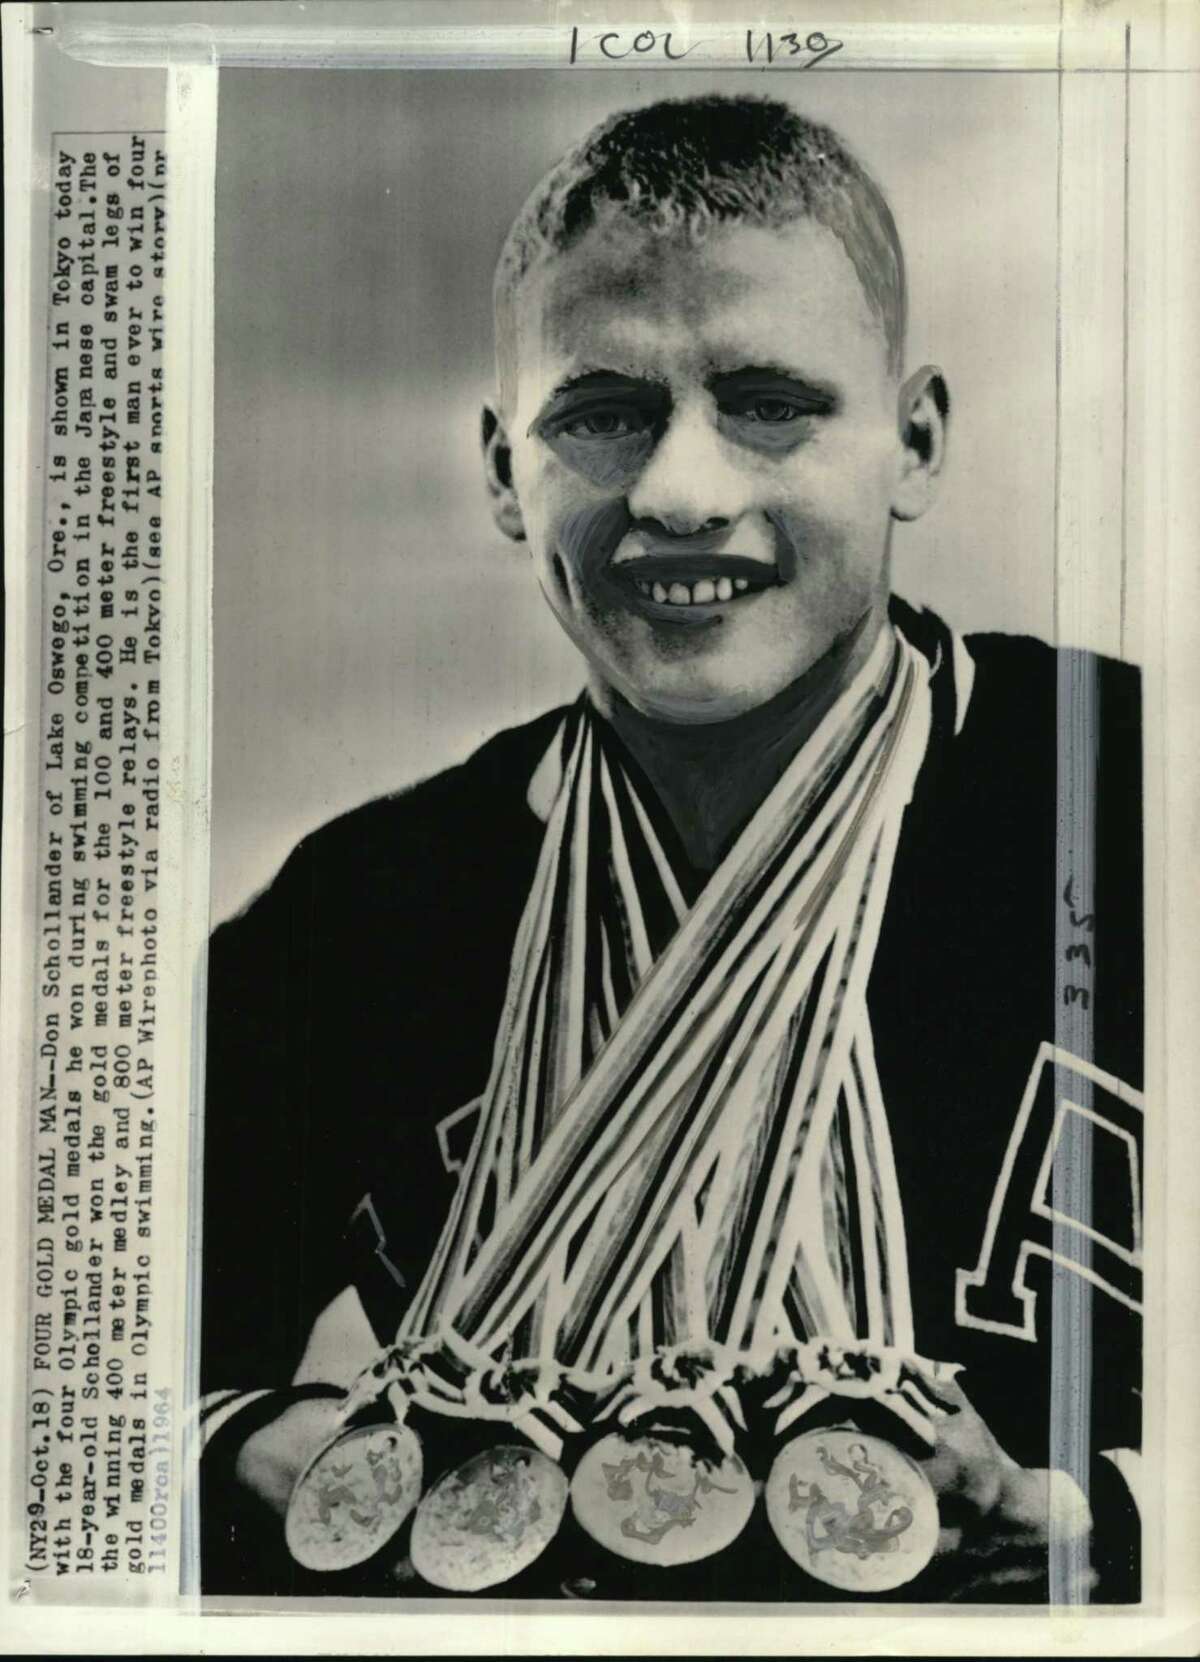 Don Schollander won four Olympic gold medals for the 100 and 400 meter freestyle and swam legs of the winning 400 meter medley and 800 meter freestyle relays in 1964.